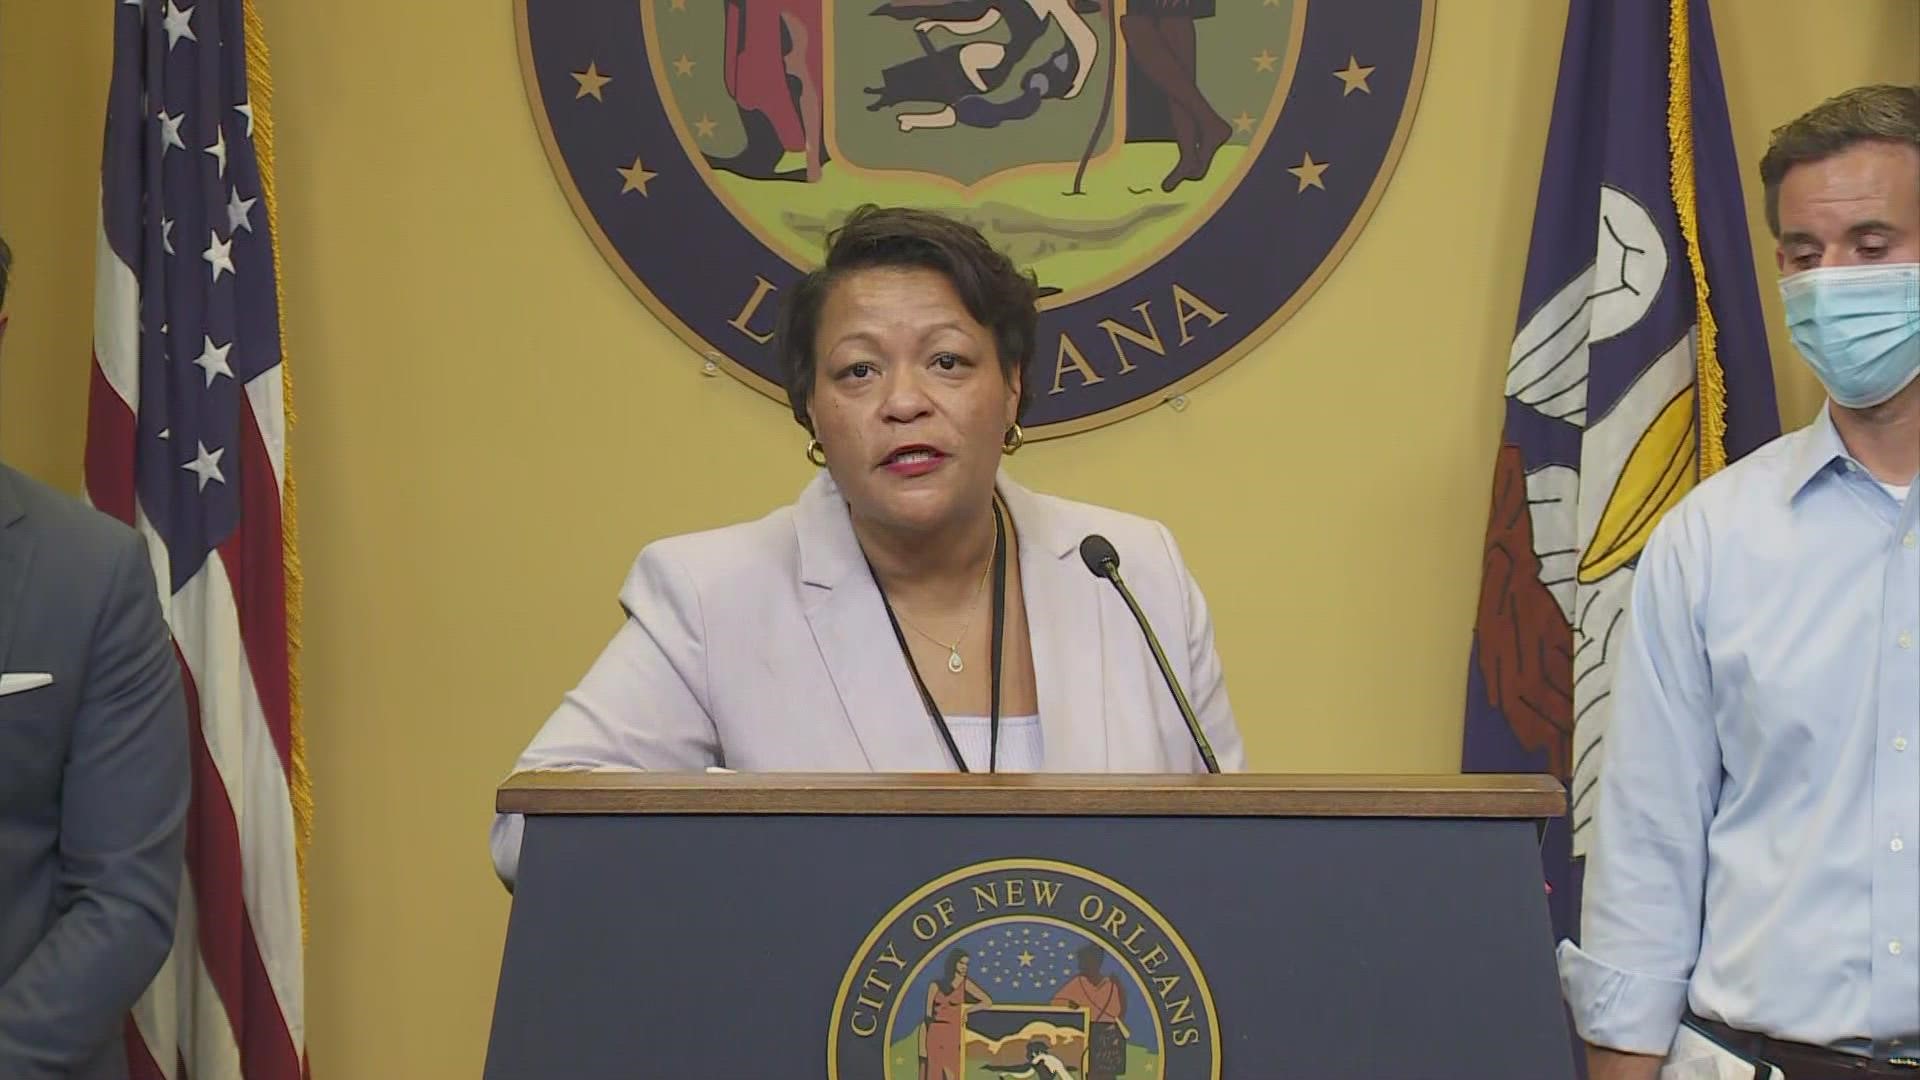 Mayor Cantrell addresses the confrontation caught on video at a restaurant.